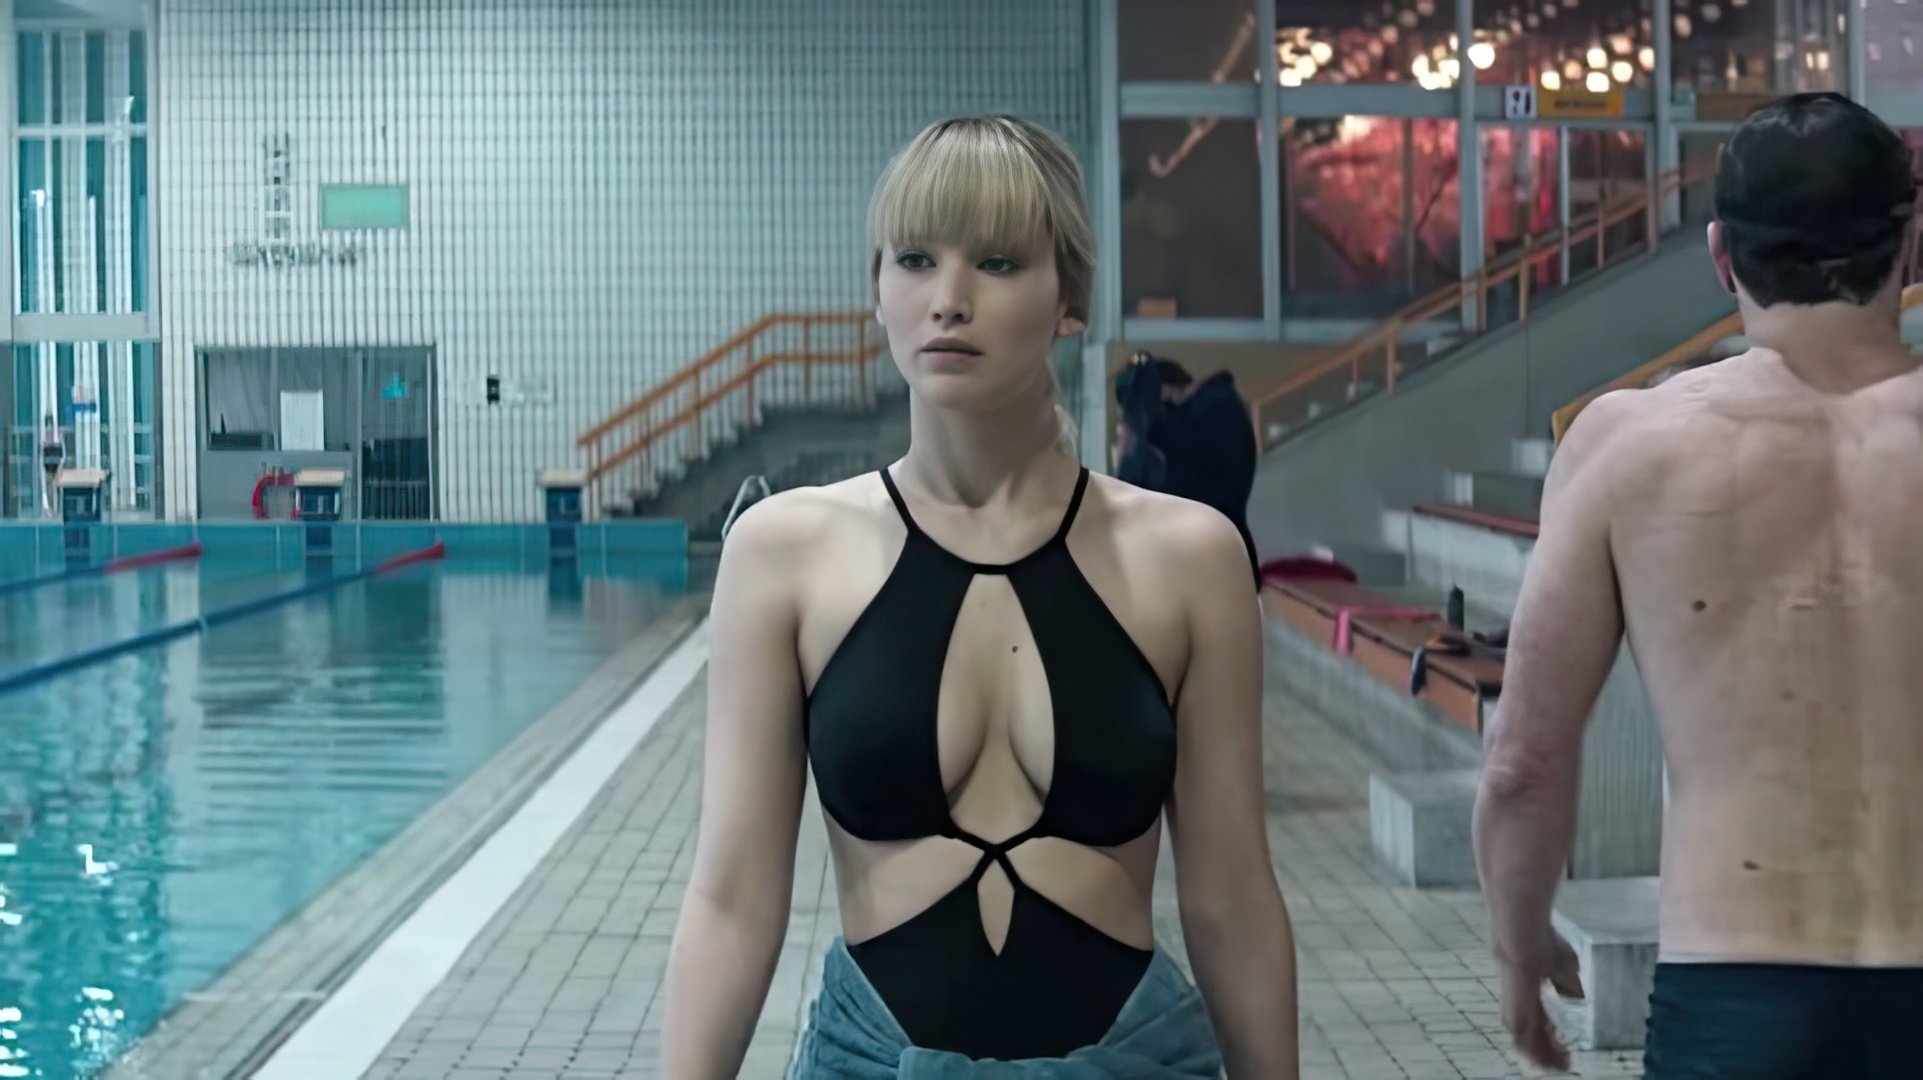 Jennifer Lawrence in a swimsuit (movie 'Red Sparrow')